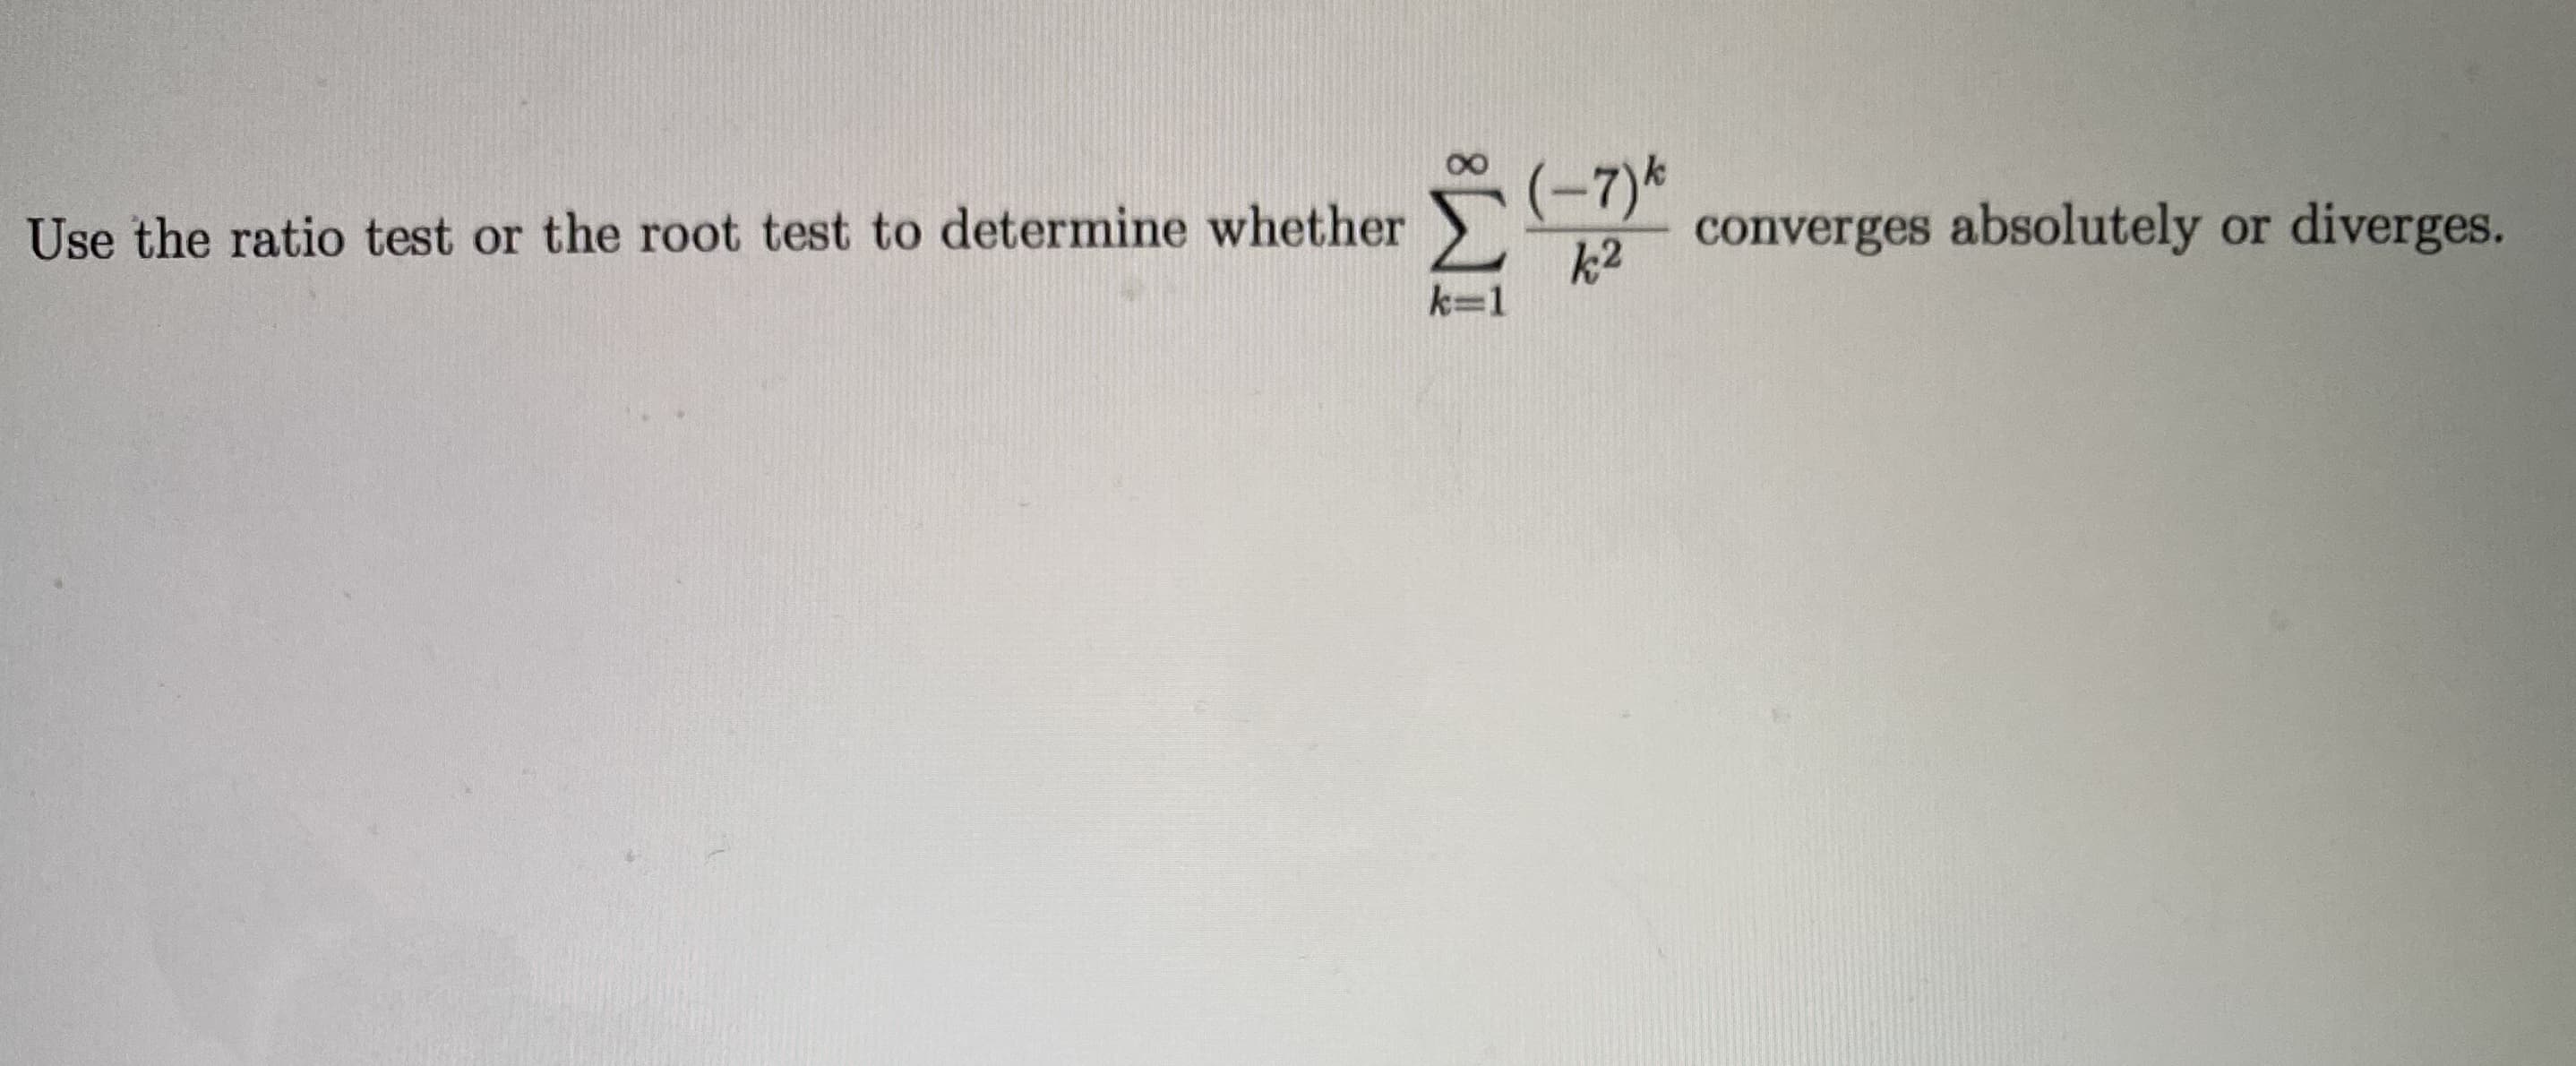 Use the ratio test or the root test to determine whether
(-7)*
converges absolutely or diverges.
k2
k=1
